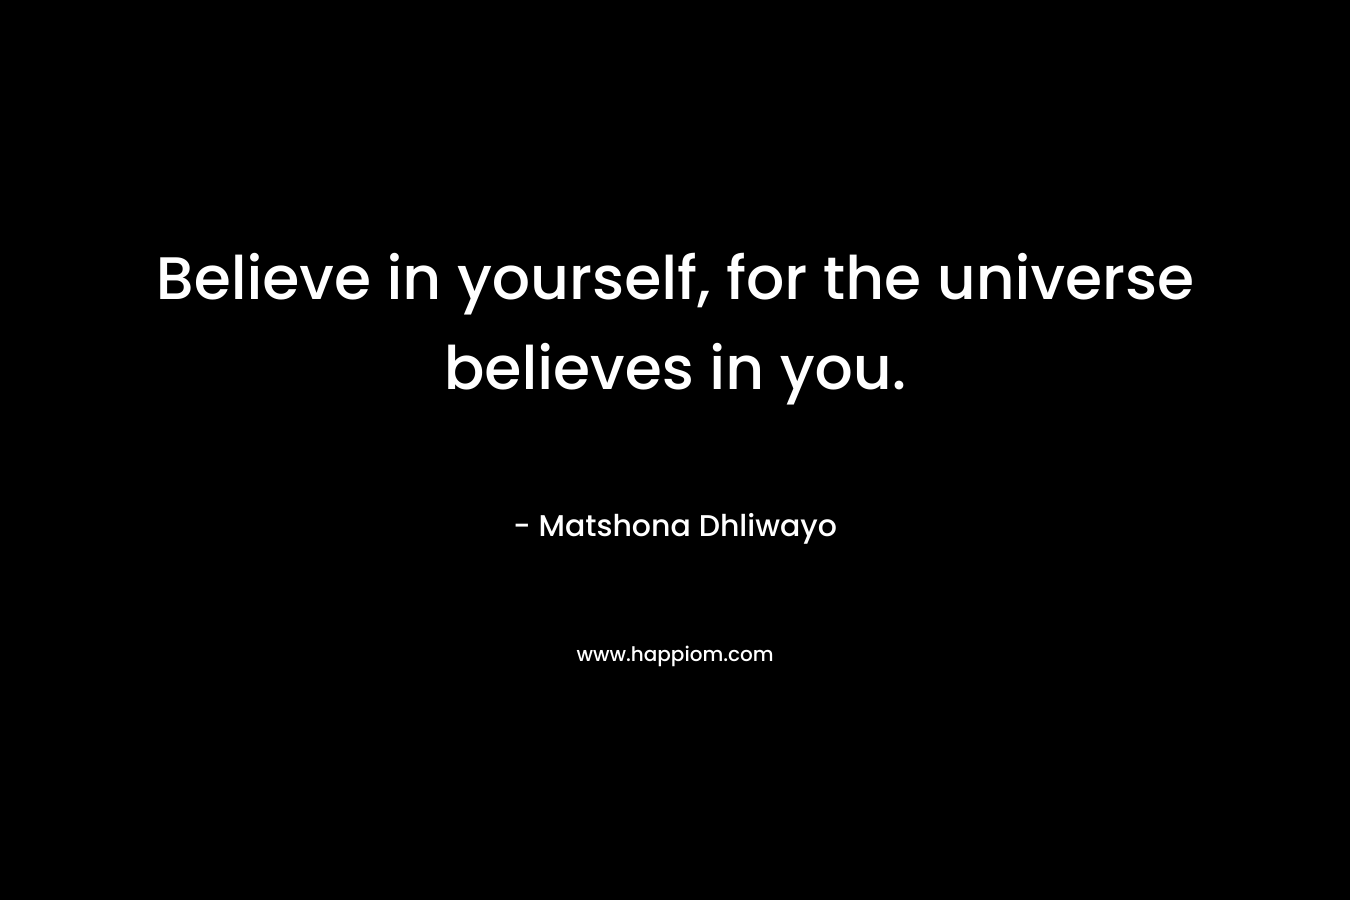 Believe in yourself, for the universe believes in you.